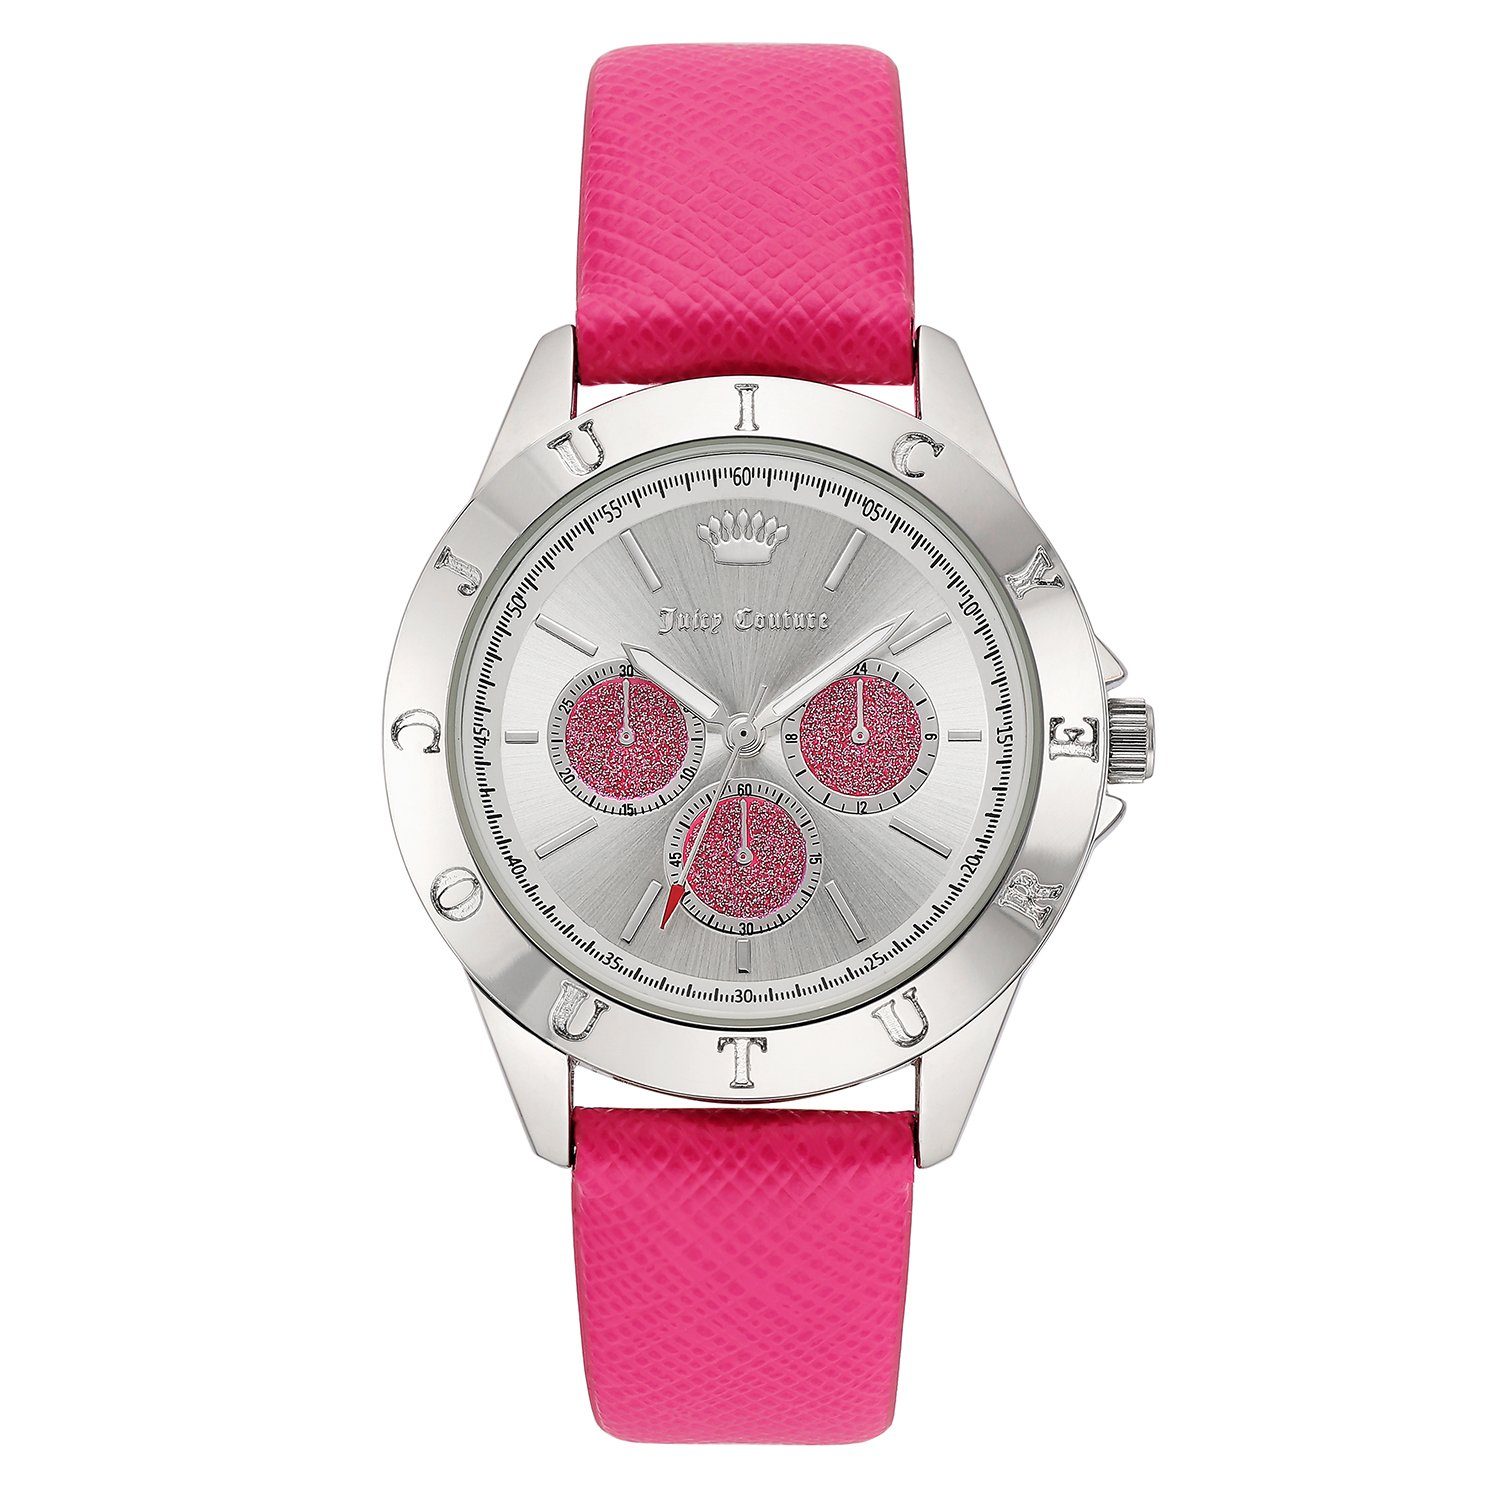 Juicy Couture JC/1295SVHP Digitaluhr